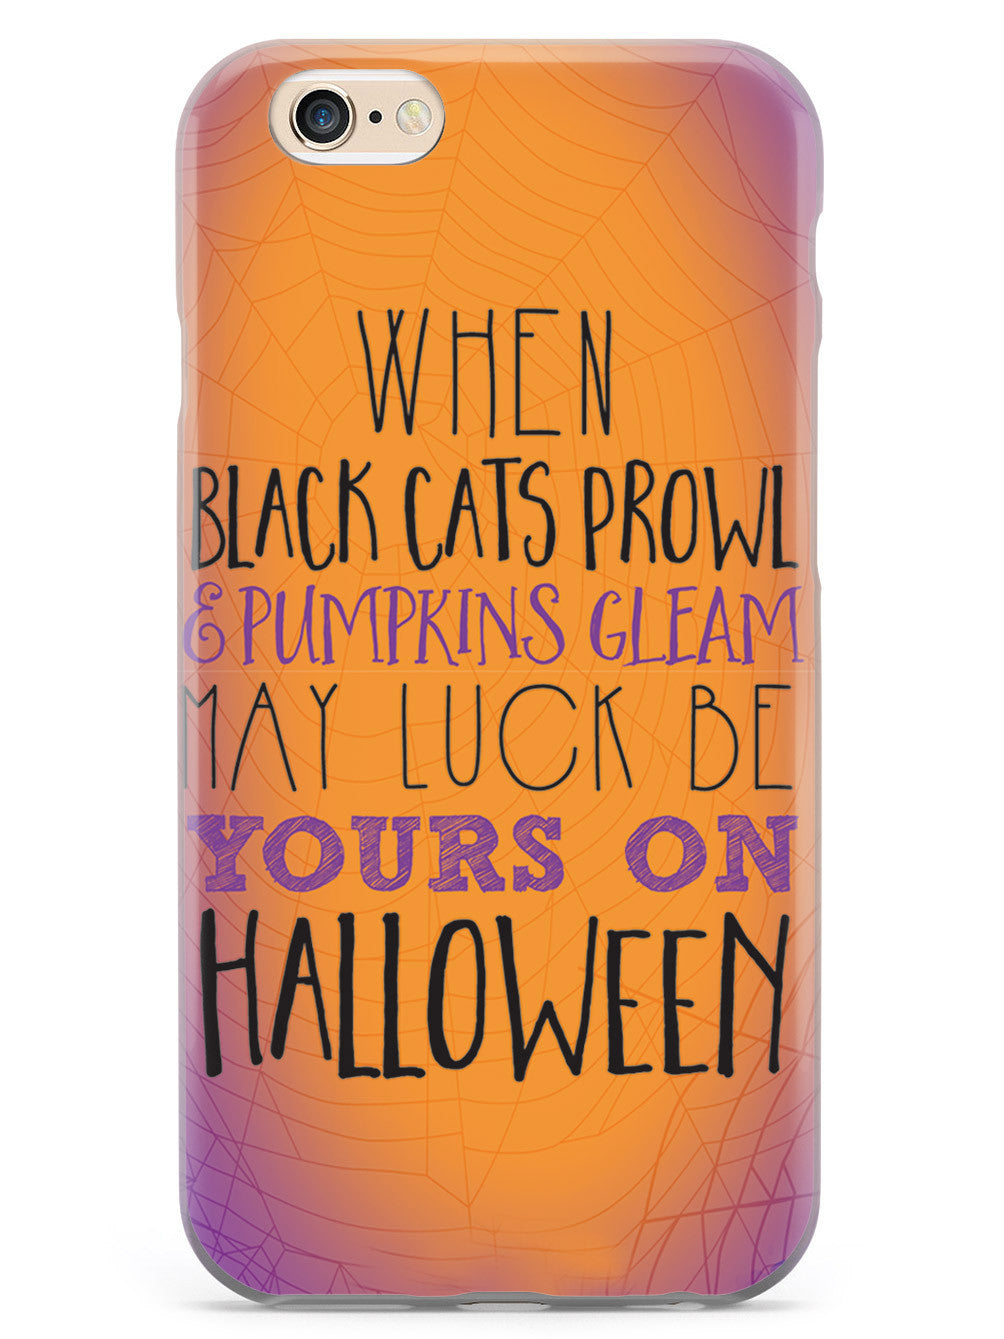 Black Cats Prowl and Pumpkins Gleam  Case